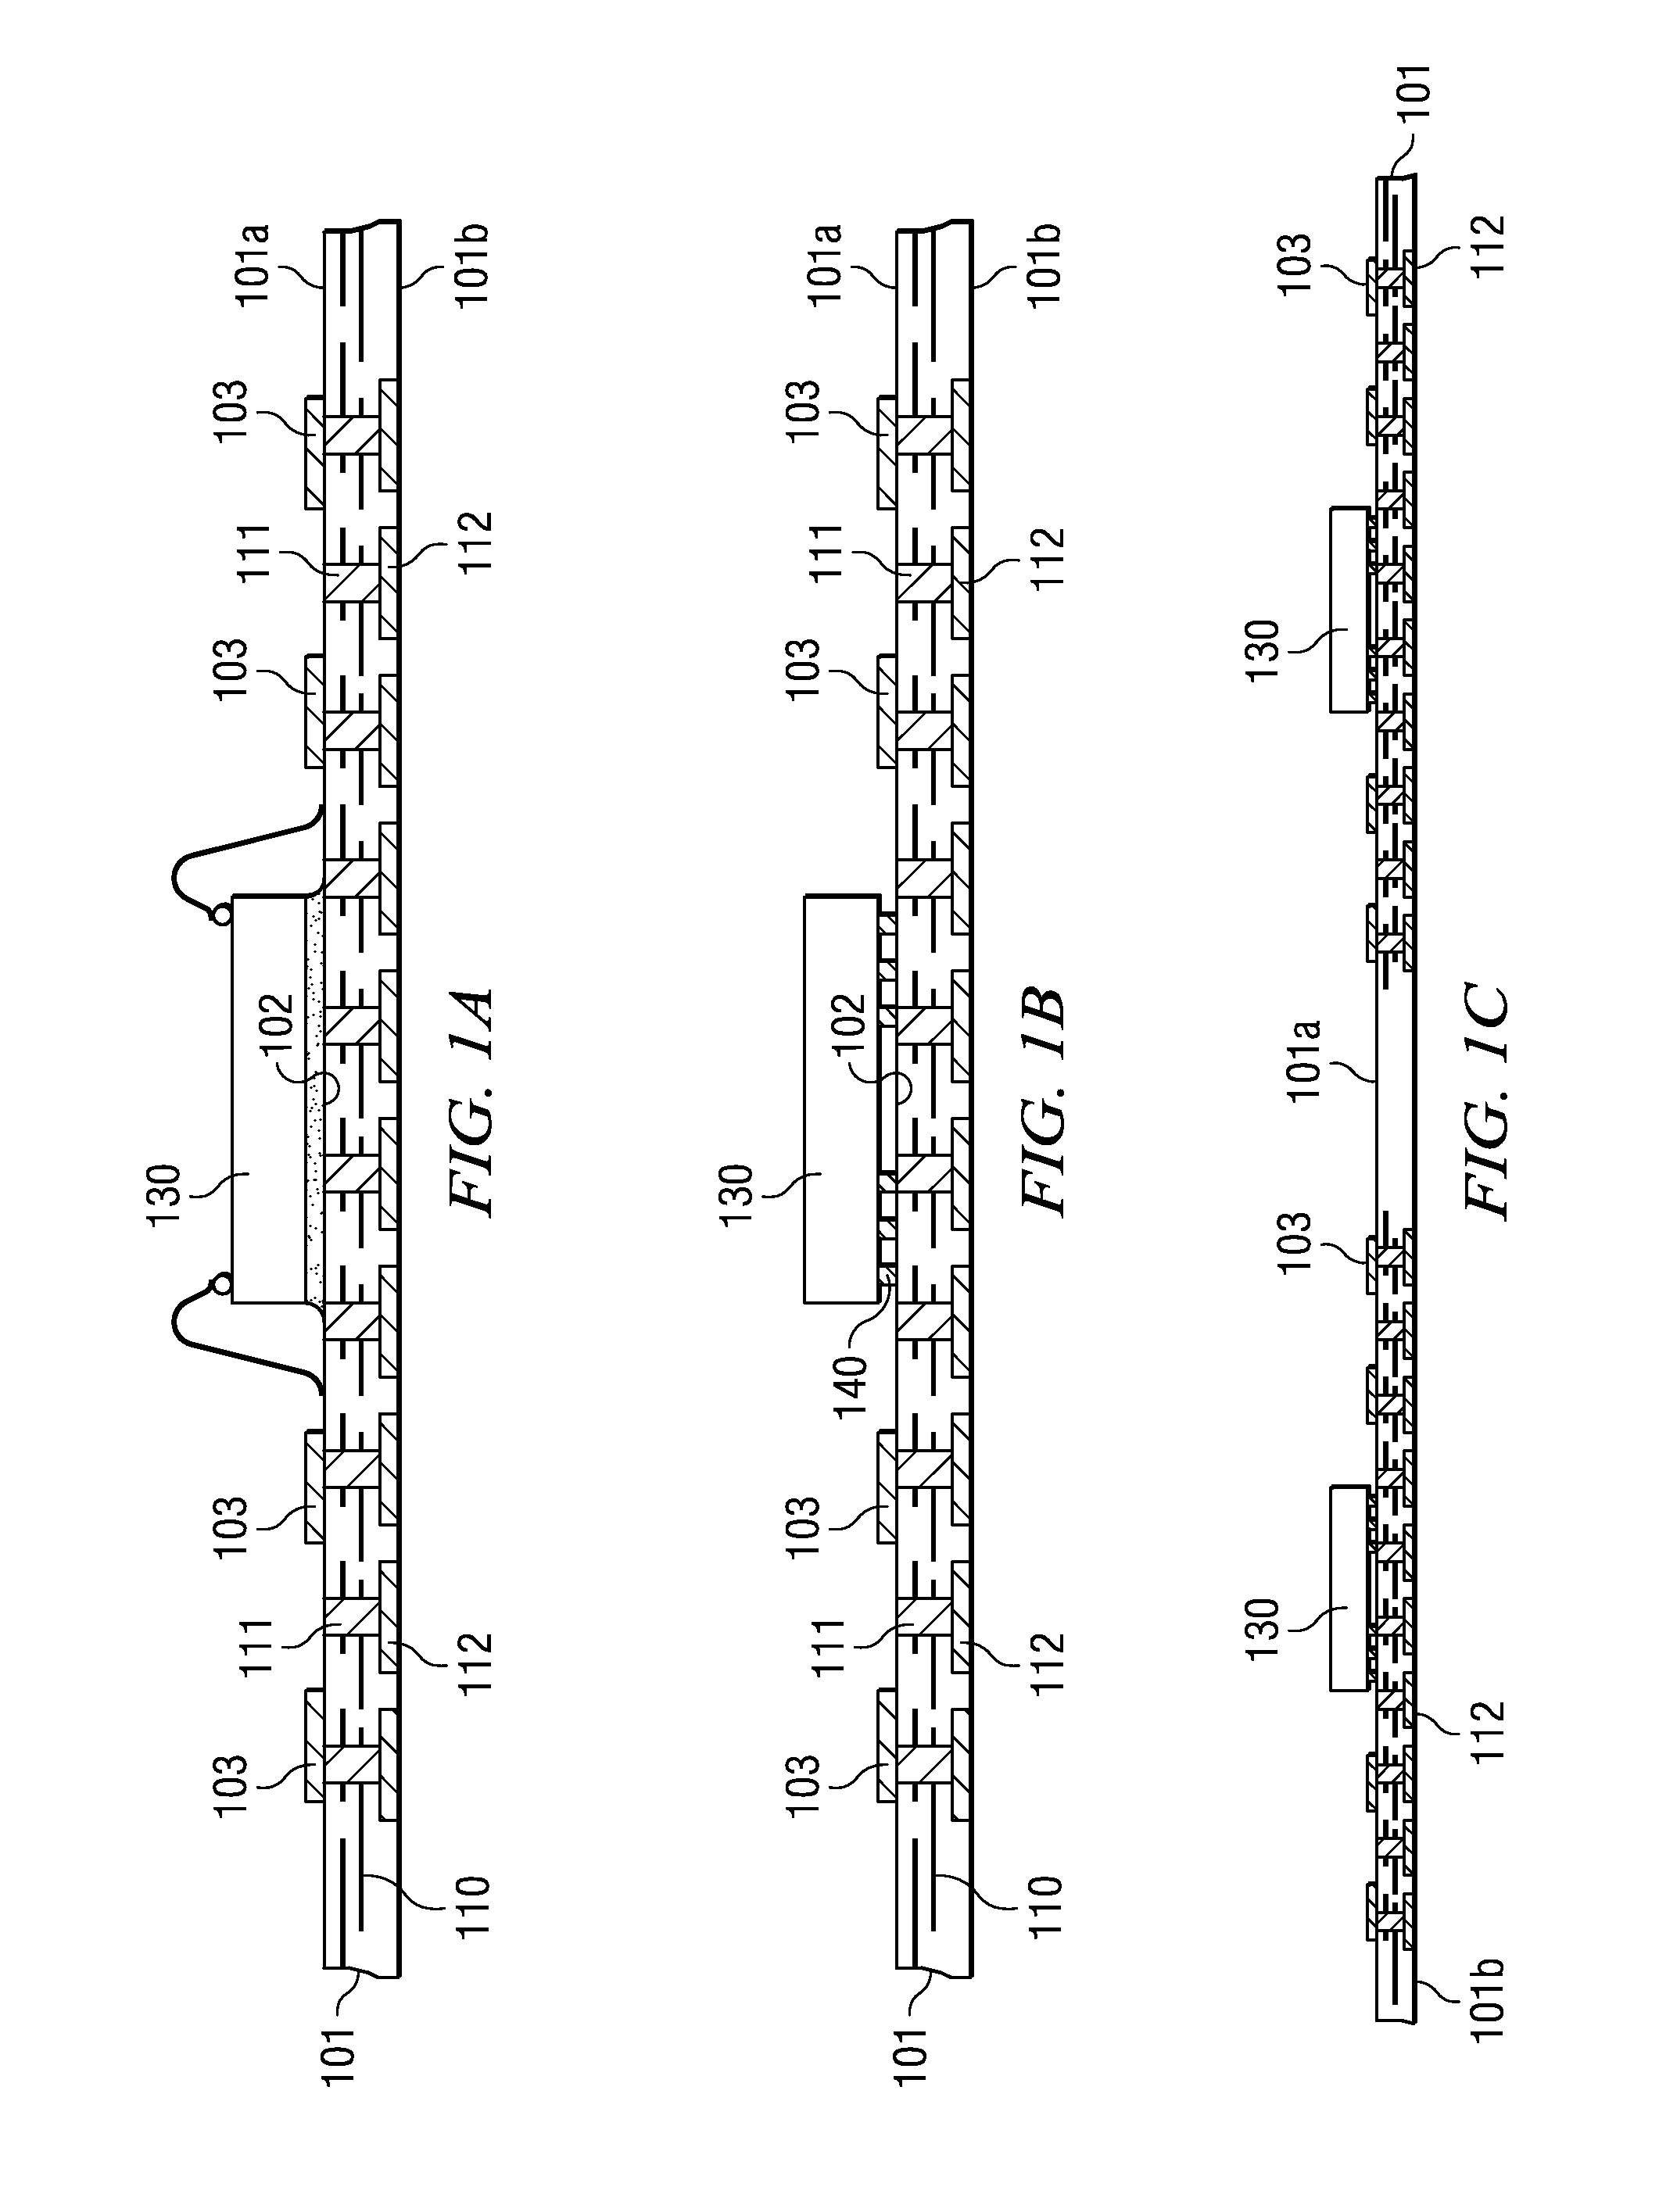 Method for Fabricating Array-Molded Package-on-Package